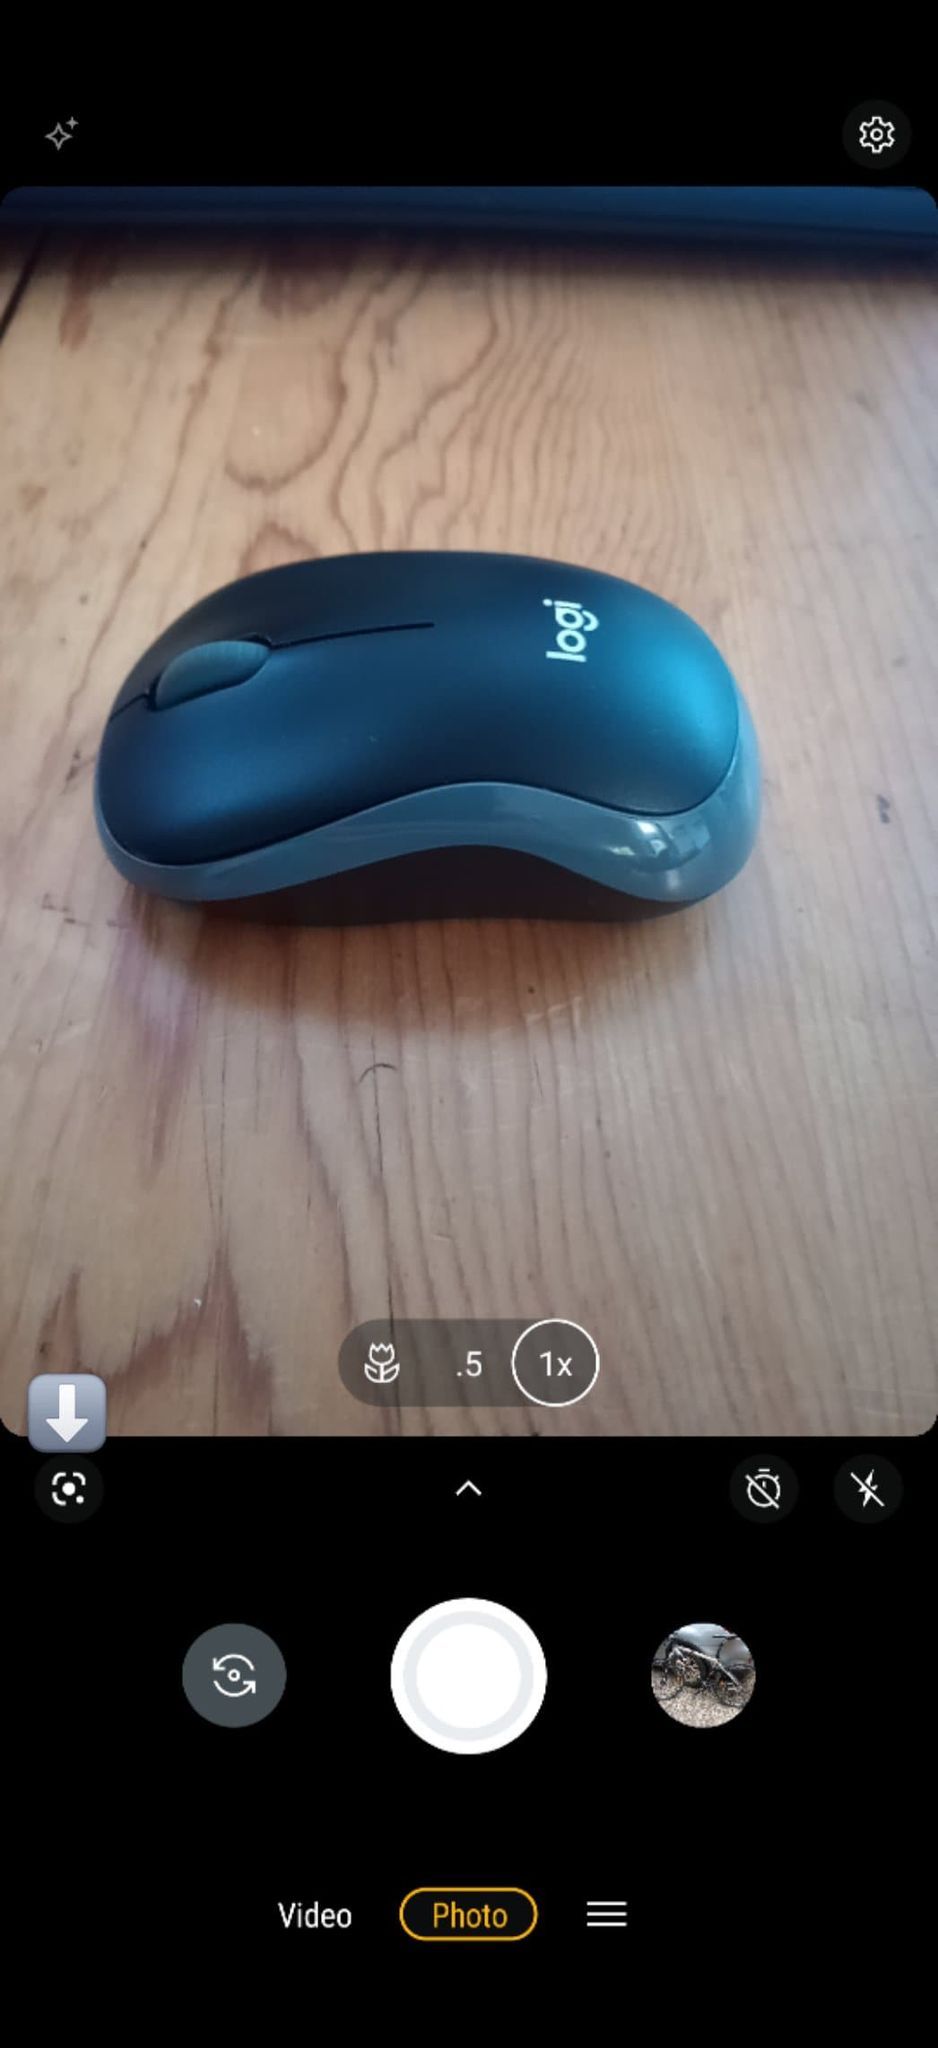 Image shows the Android camera app open with a computer mouse in the display and an arrow pointing to the Google Lens icon in the lower left.